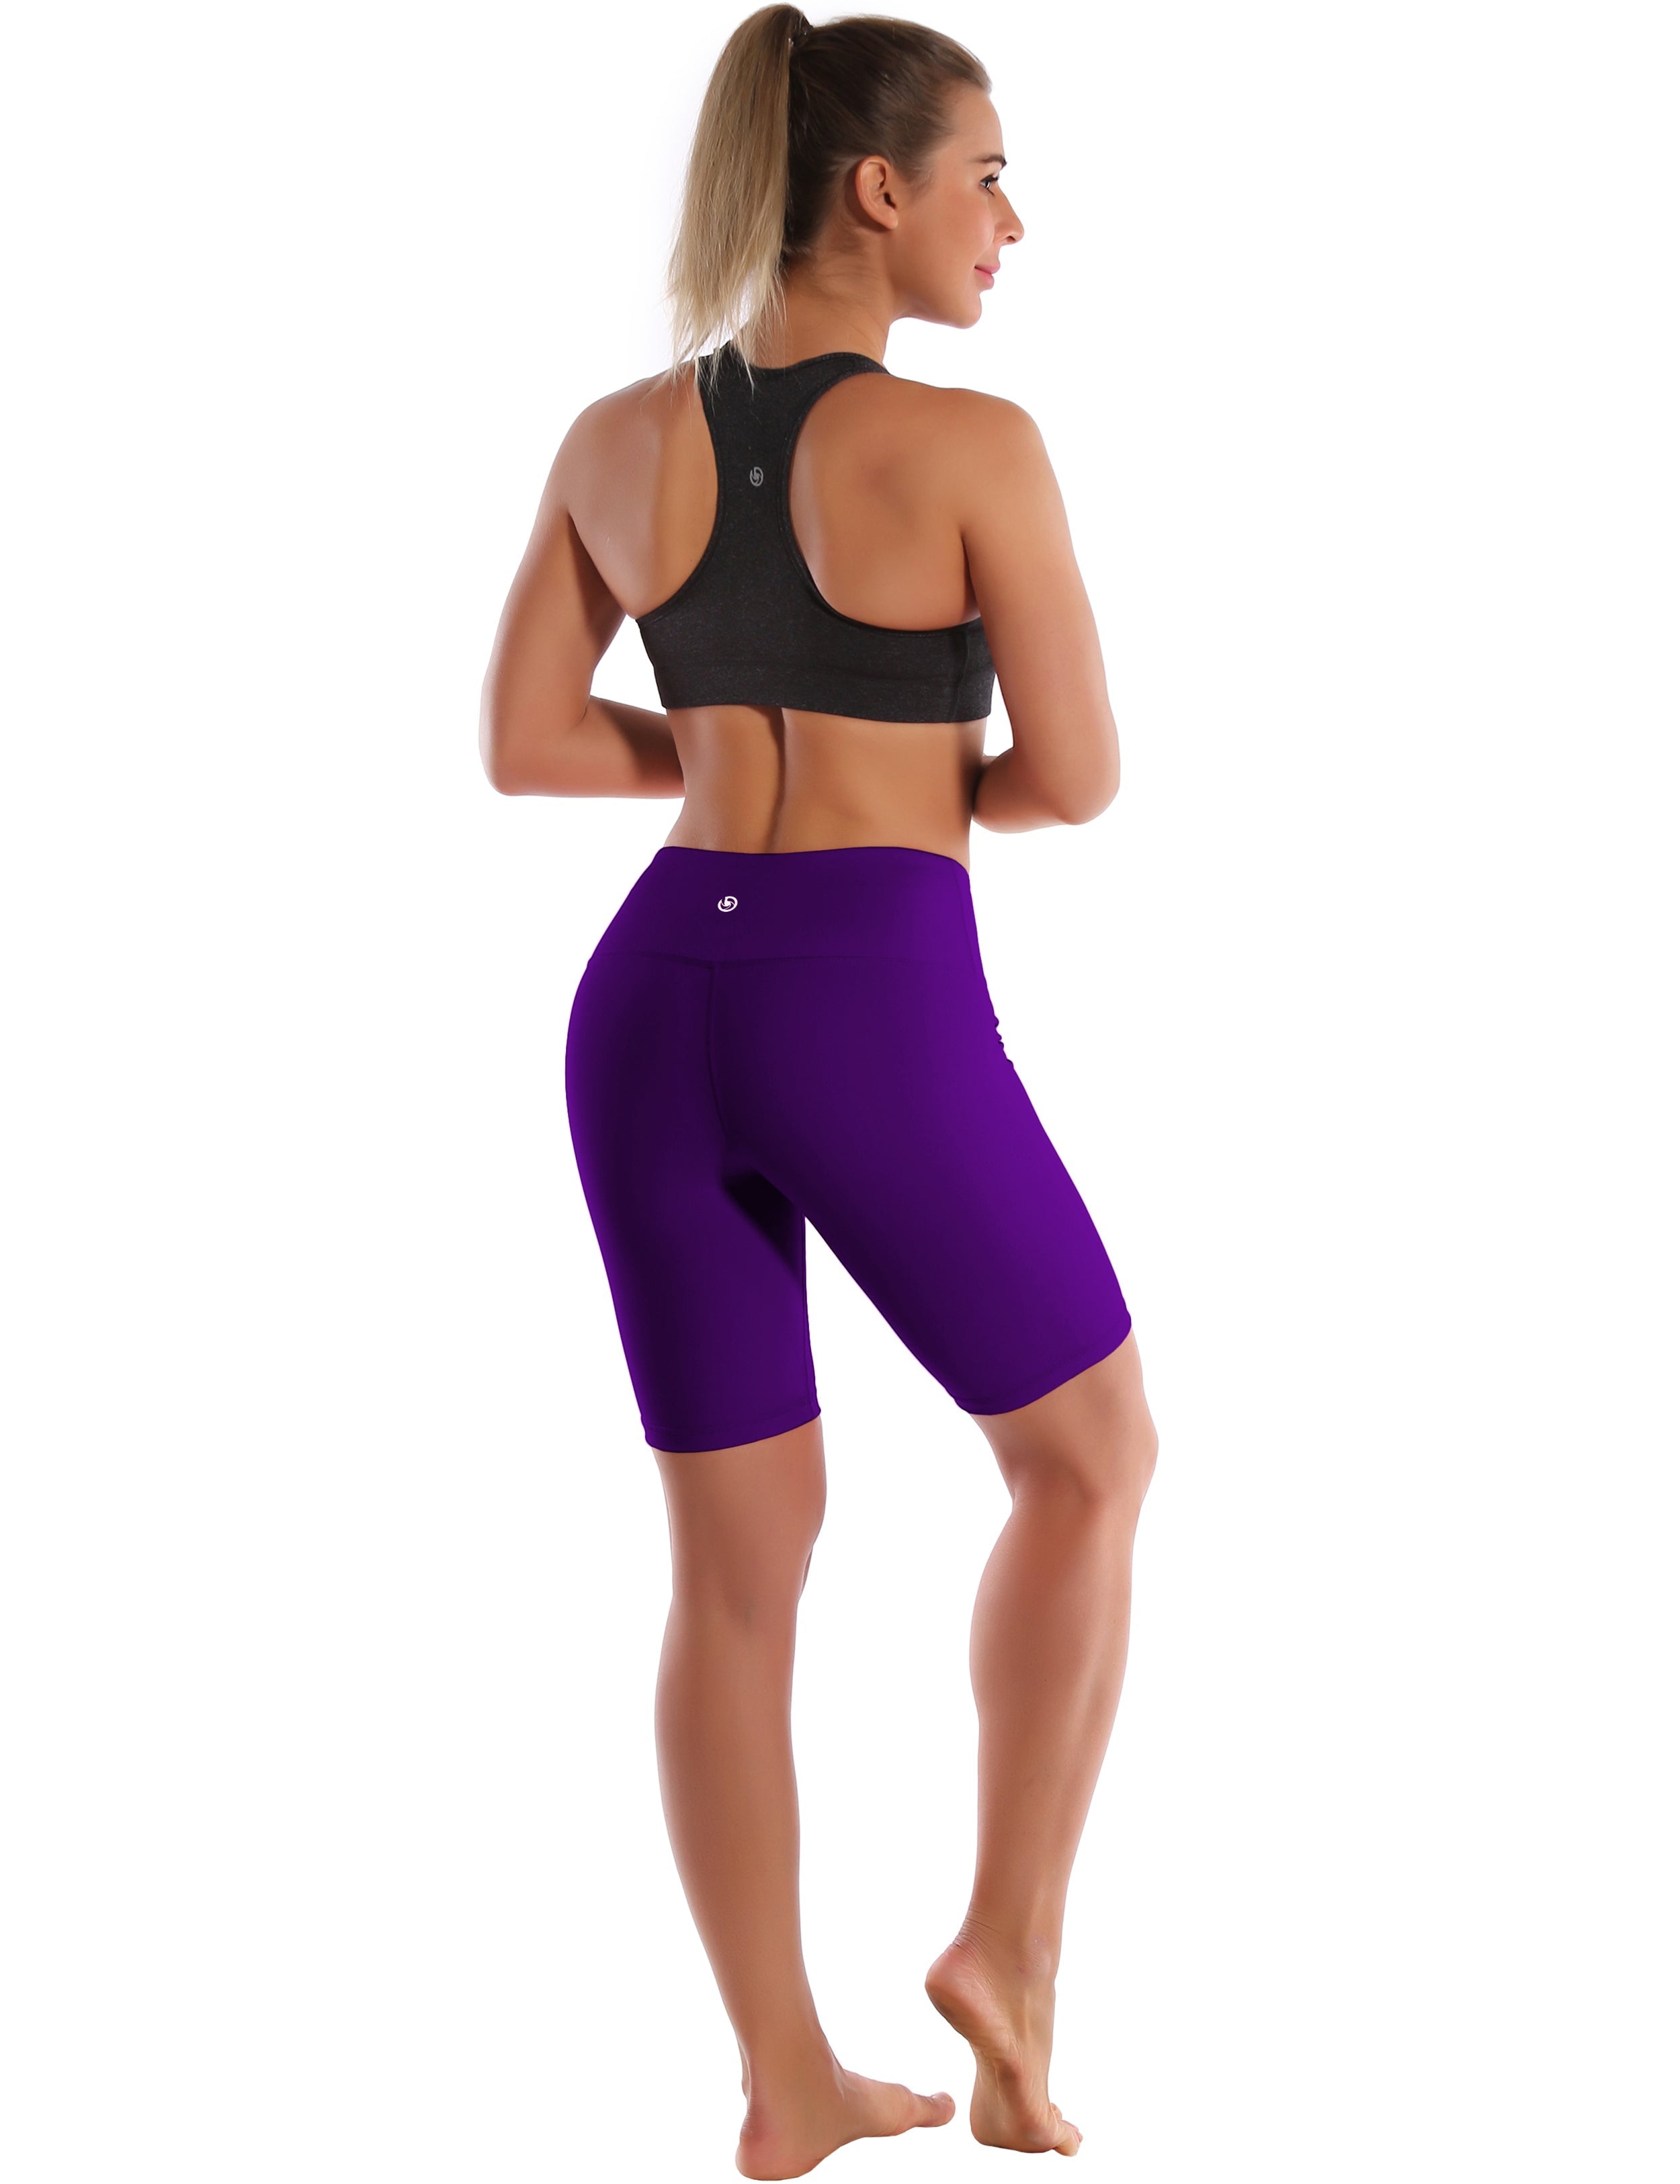 8" High Waist Biking Shorts eggplantpurple Sleek, soft, smooth and totally comfortable: our newest style is here. Softest-ever fabric High elasticity High density 4-way stretch Fabric doesn't attract lint easily No see-through Moisture-wicking Machine wash 75% Nylon, 25% Spandex